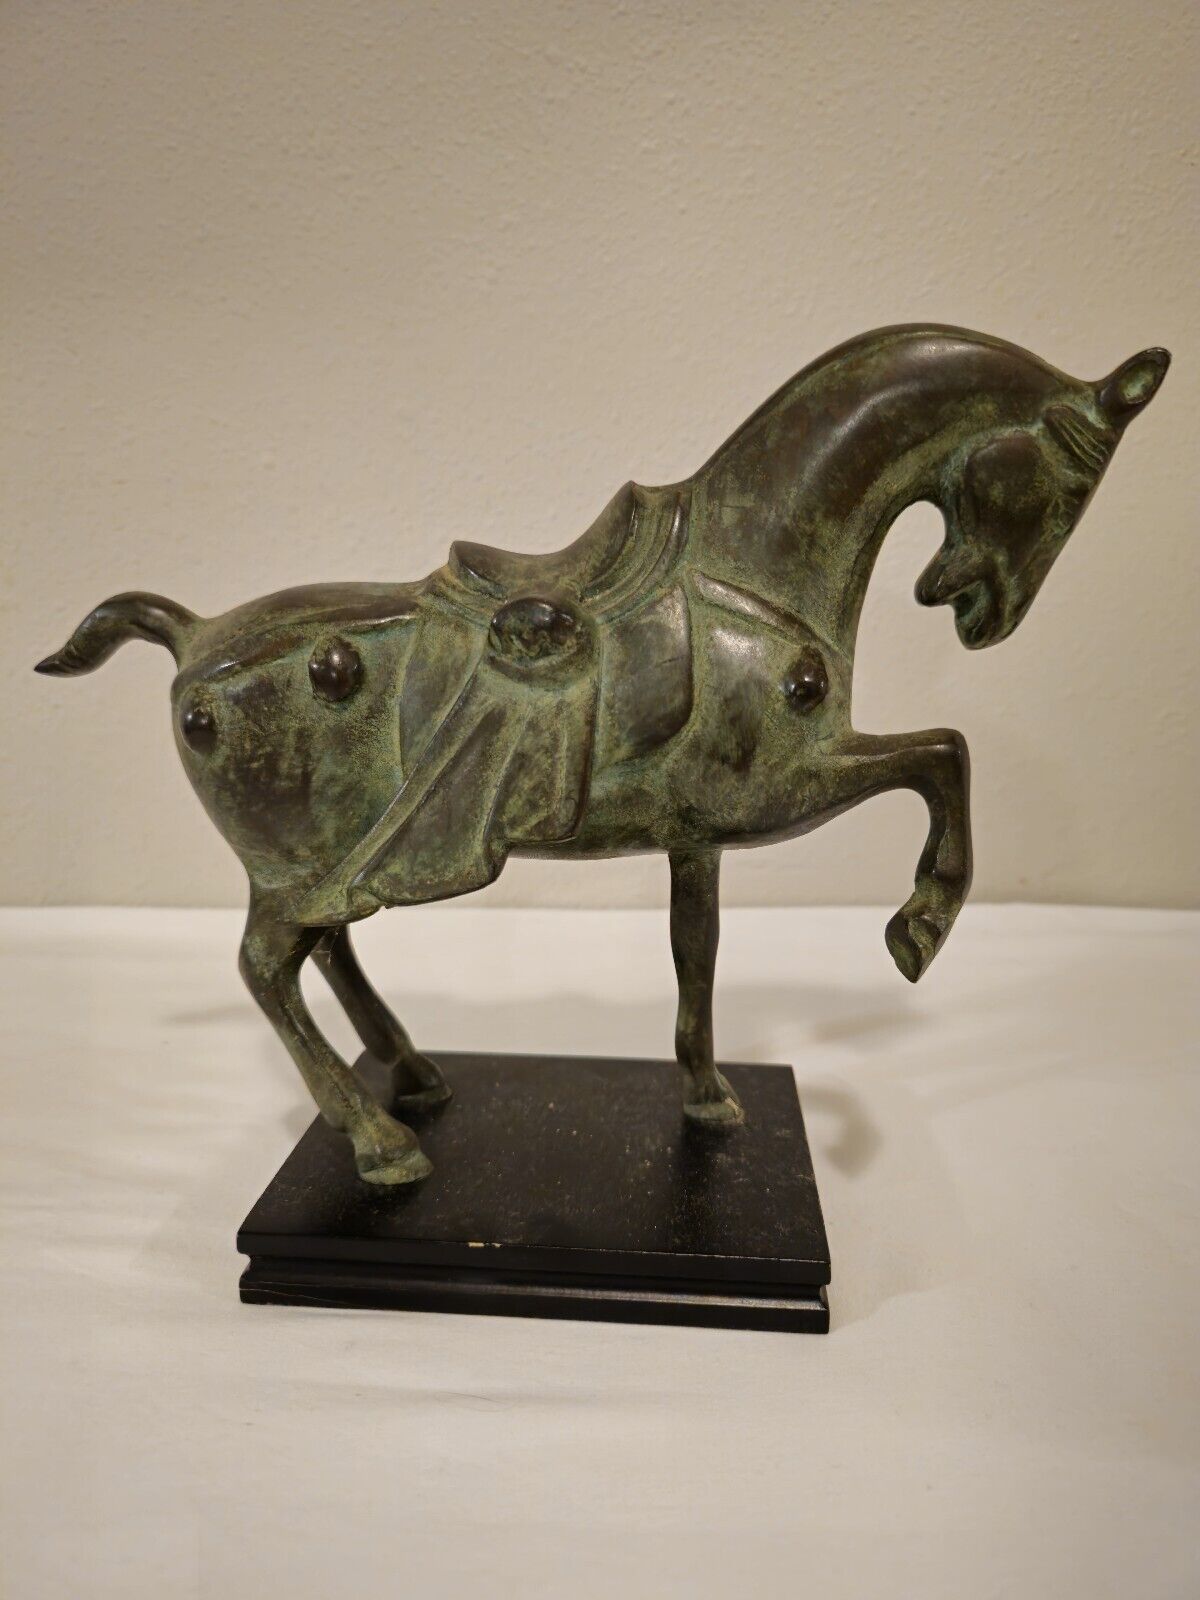 TANG STYLE ANTIQUE GREEN BRONZE METAL PRANCING HORSE STATUE WITH WOOD BASE. 